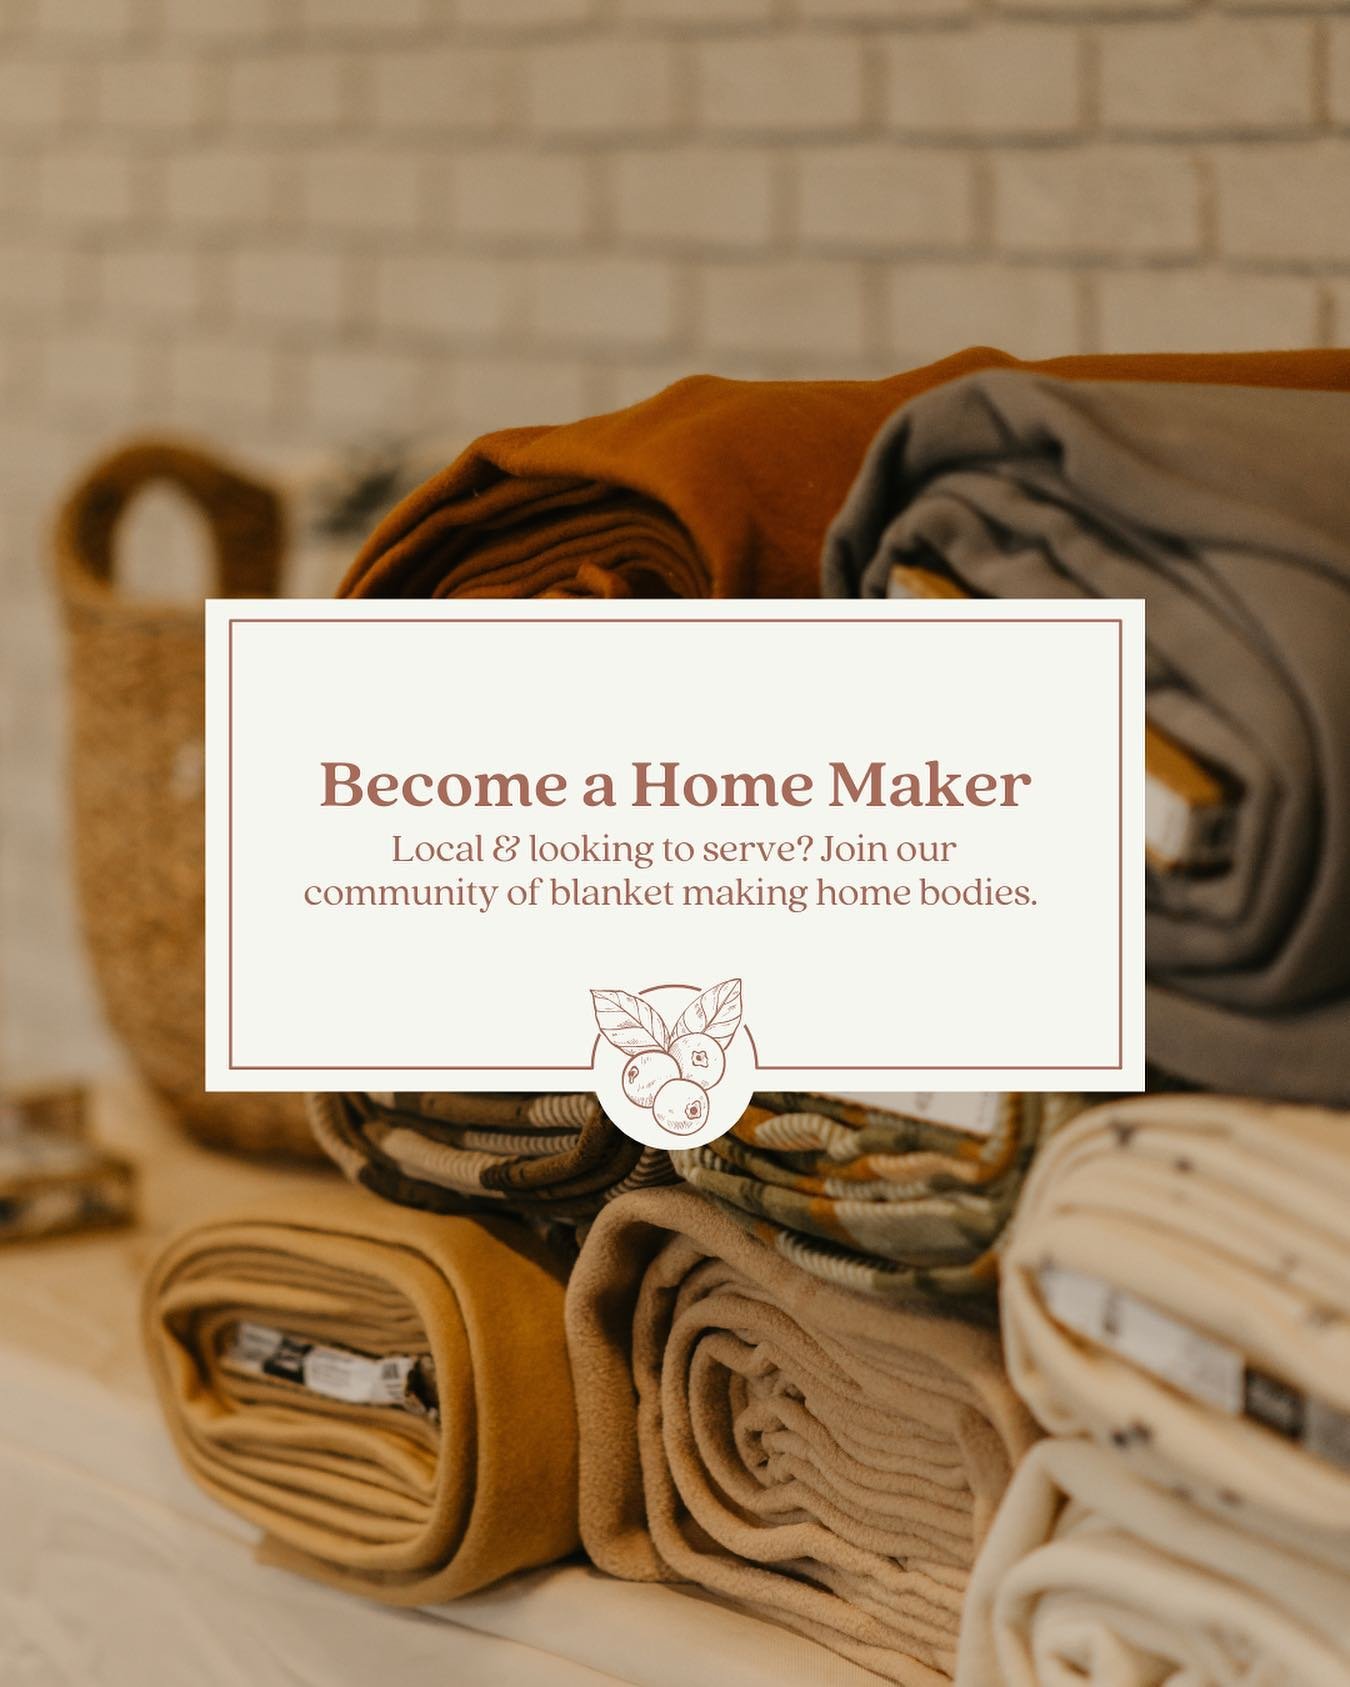 Located in northwest Indiana &amp; looking for a way to serve &mdash; specifically in filling empty arms? We&rsquo;d love to invite you here!

Our Home Makers is a community of home bodies making blankets on their couches, in their living rooms, watc